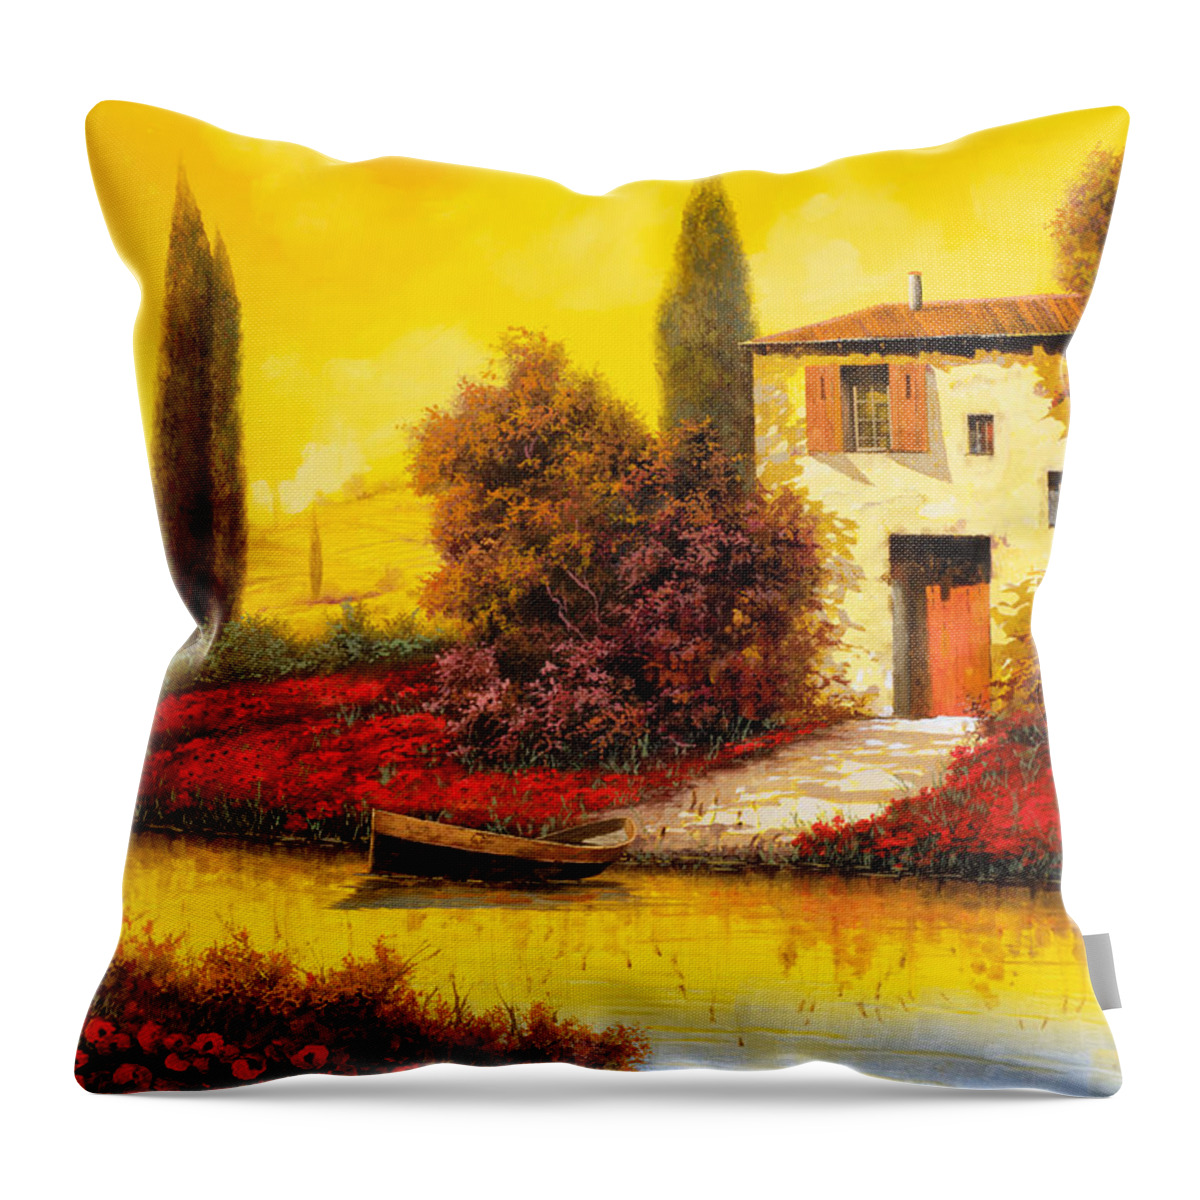 Landscape Throw Pillow featuring the painting Tanti Papaveri Lungo Il Fiume by Guido Borelli